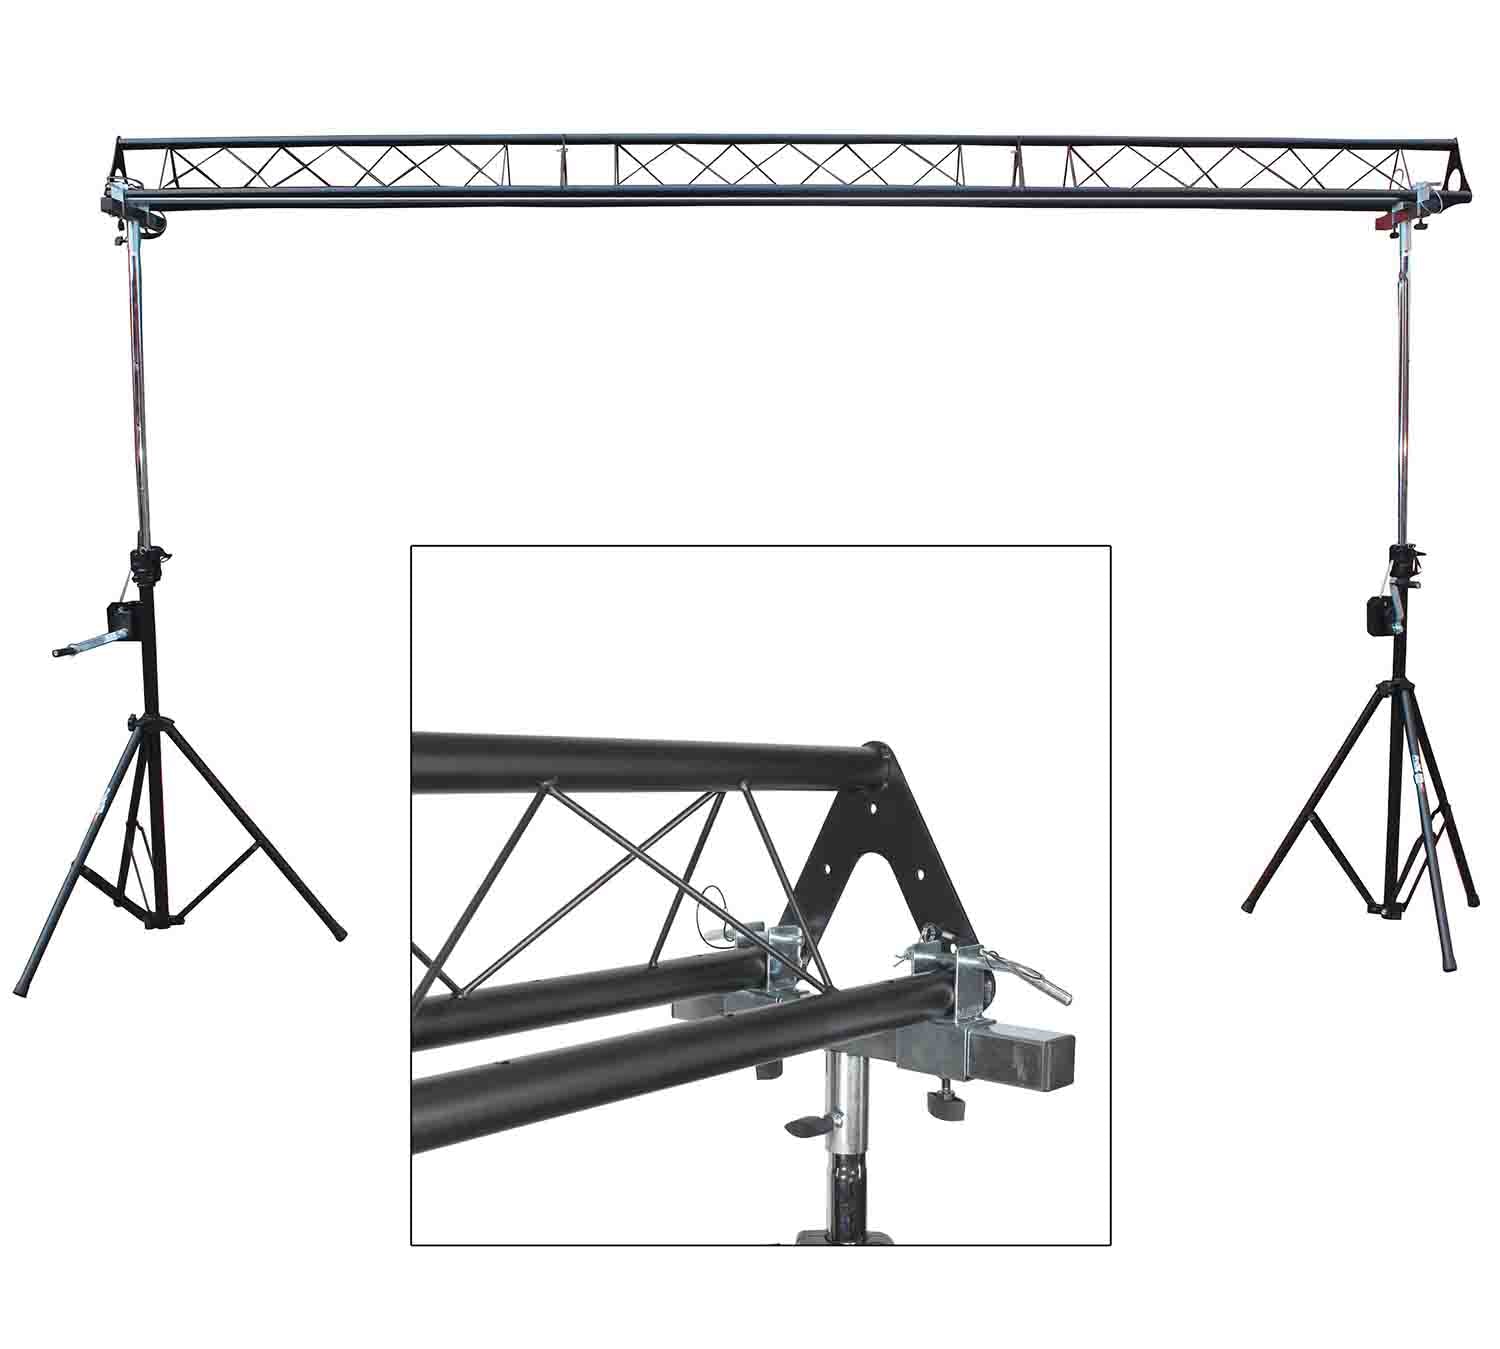 Prox T-LS35VC, Triangle Truss System for DJ Production Crank Up Lighting 14.25-inch wide 200lbs Capacity - Hollywood DJ